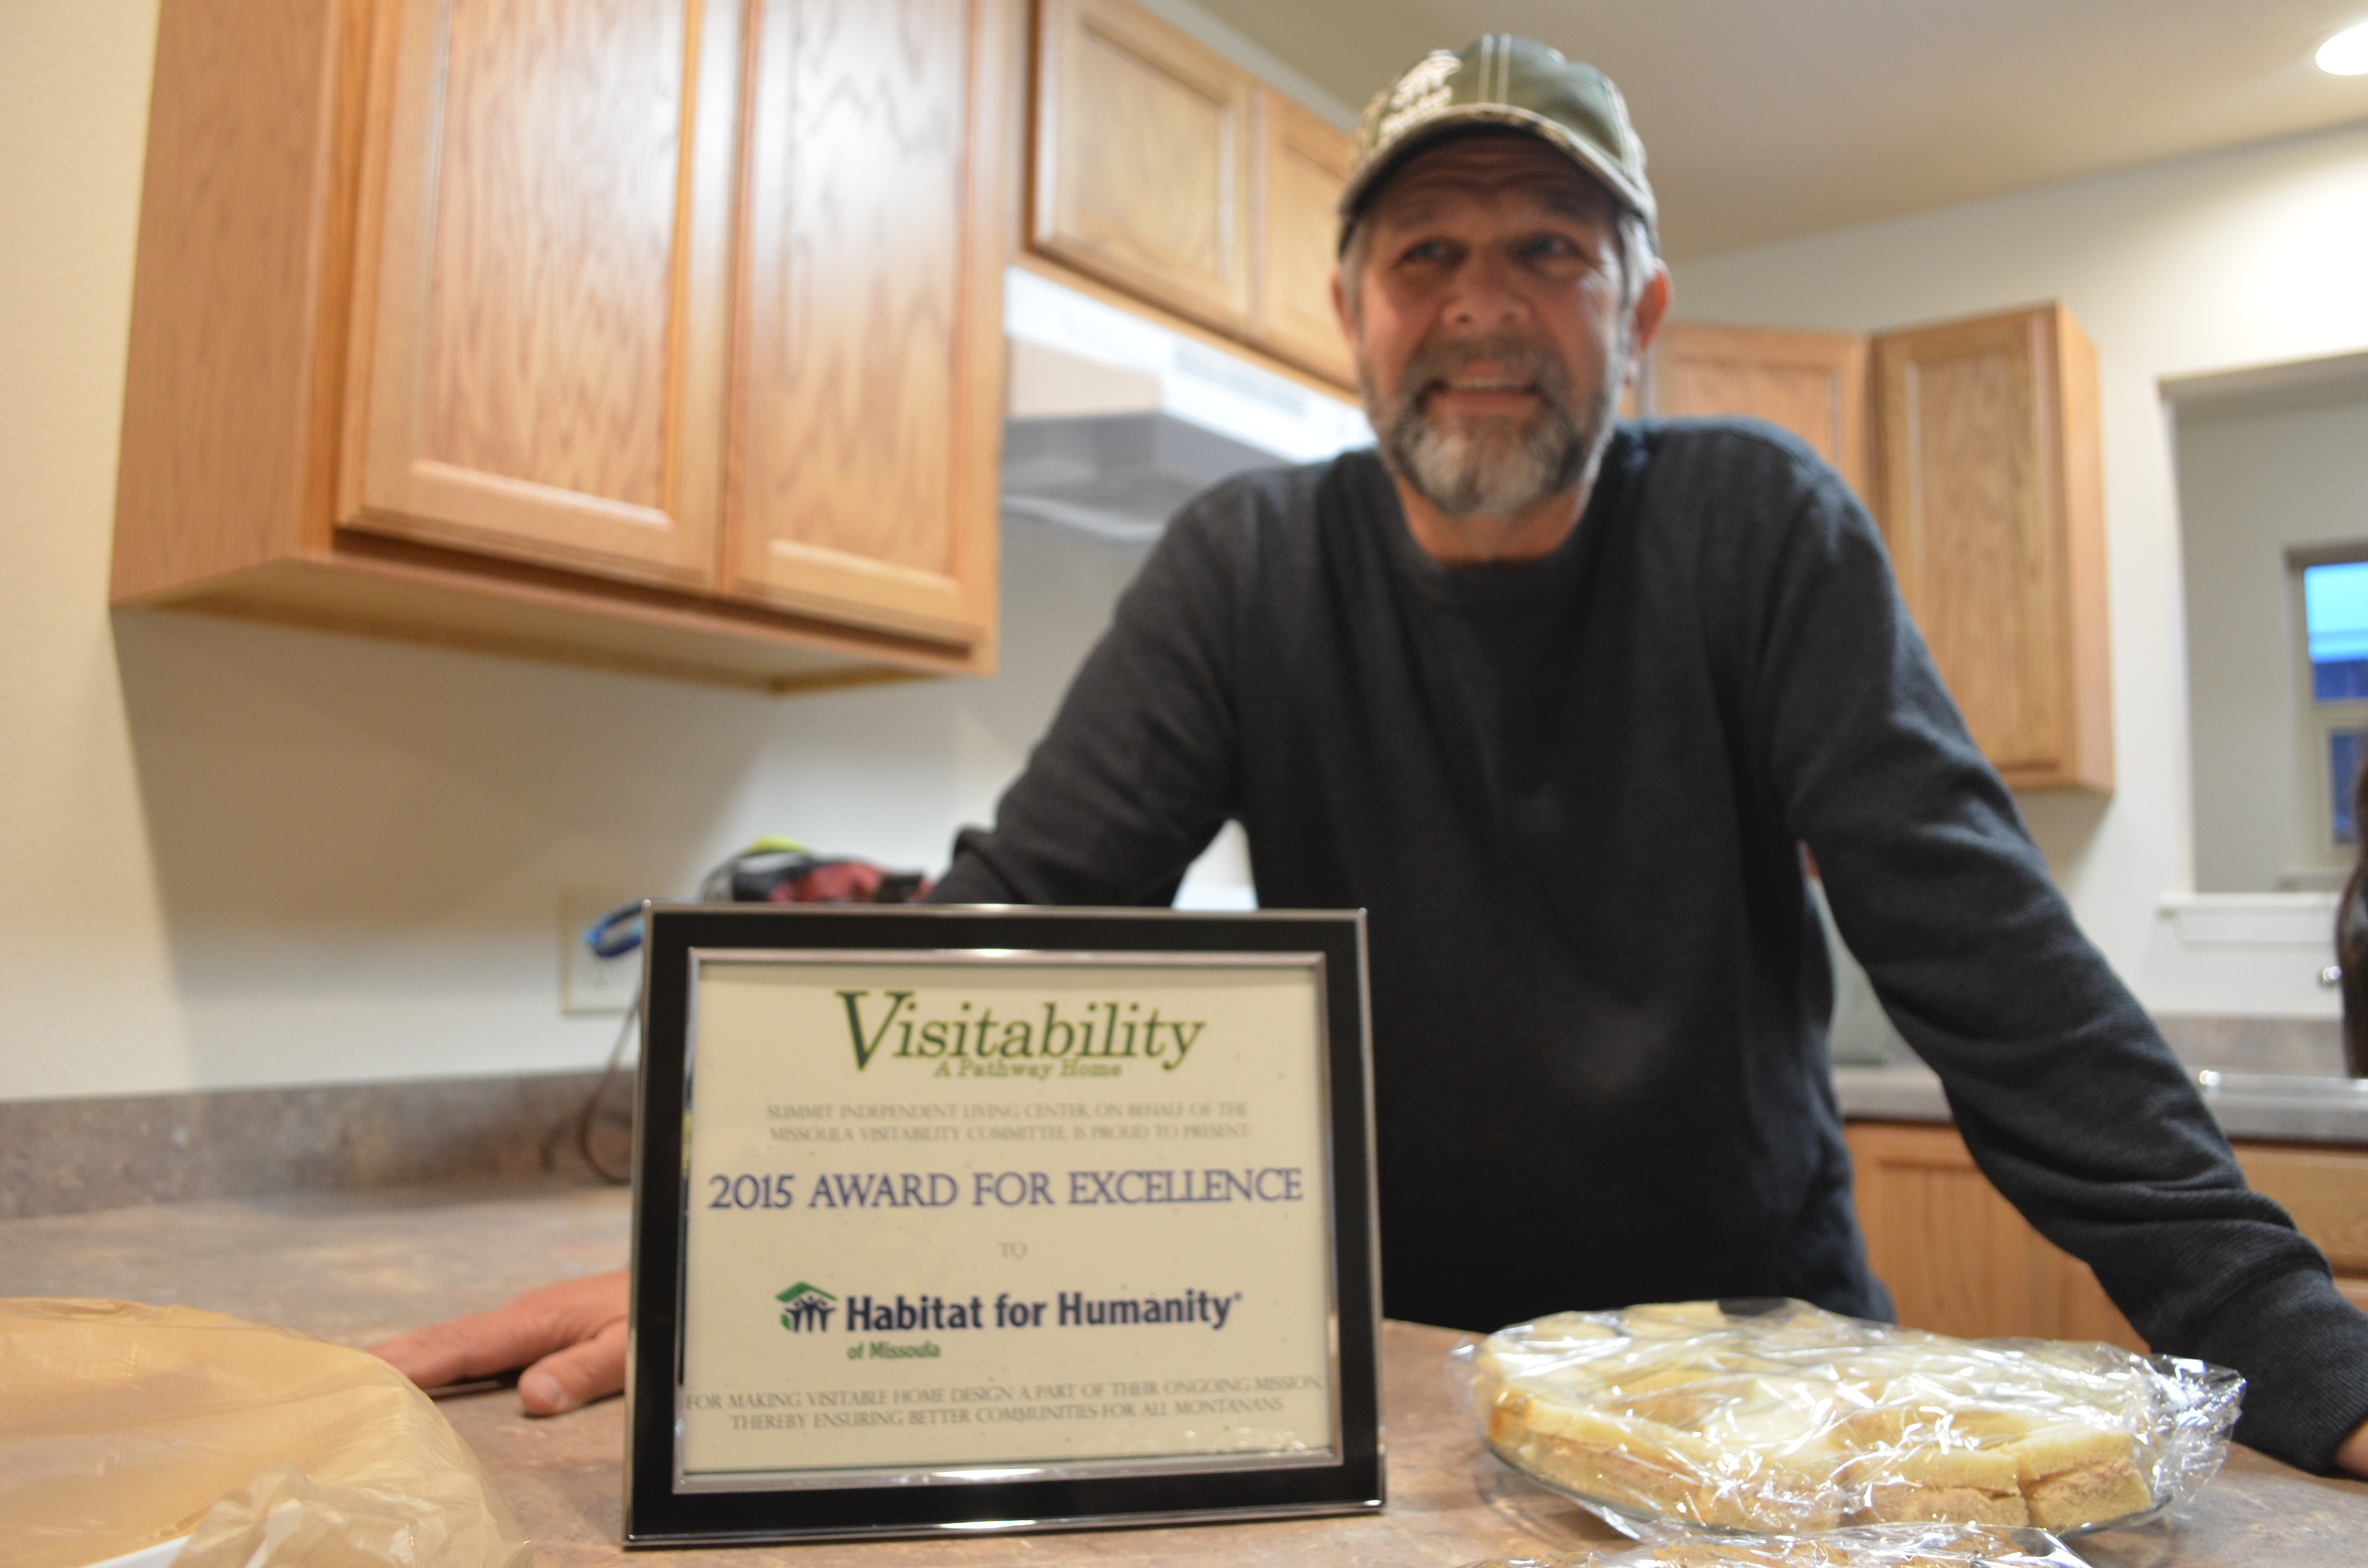 2015 Award for Excellence sitting on a counter in front of Habitat for Humanity's build team leader.